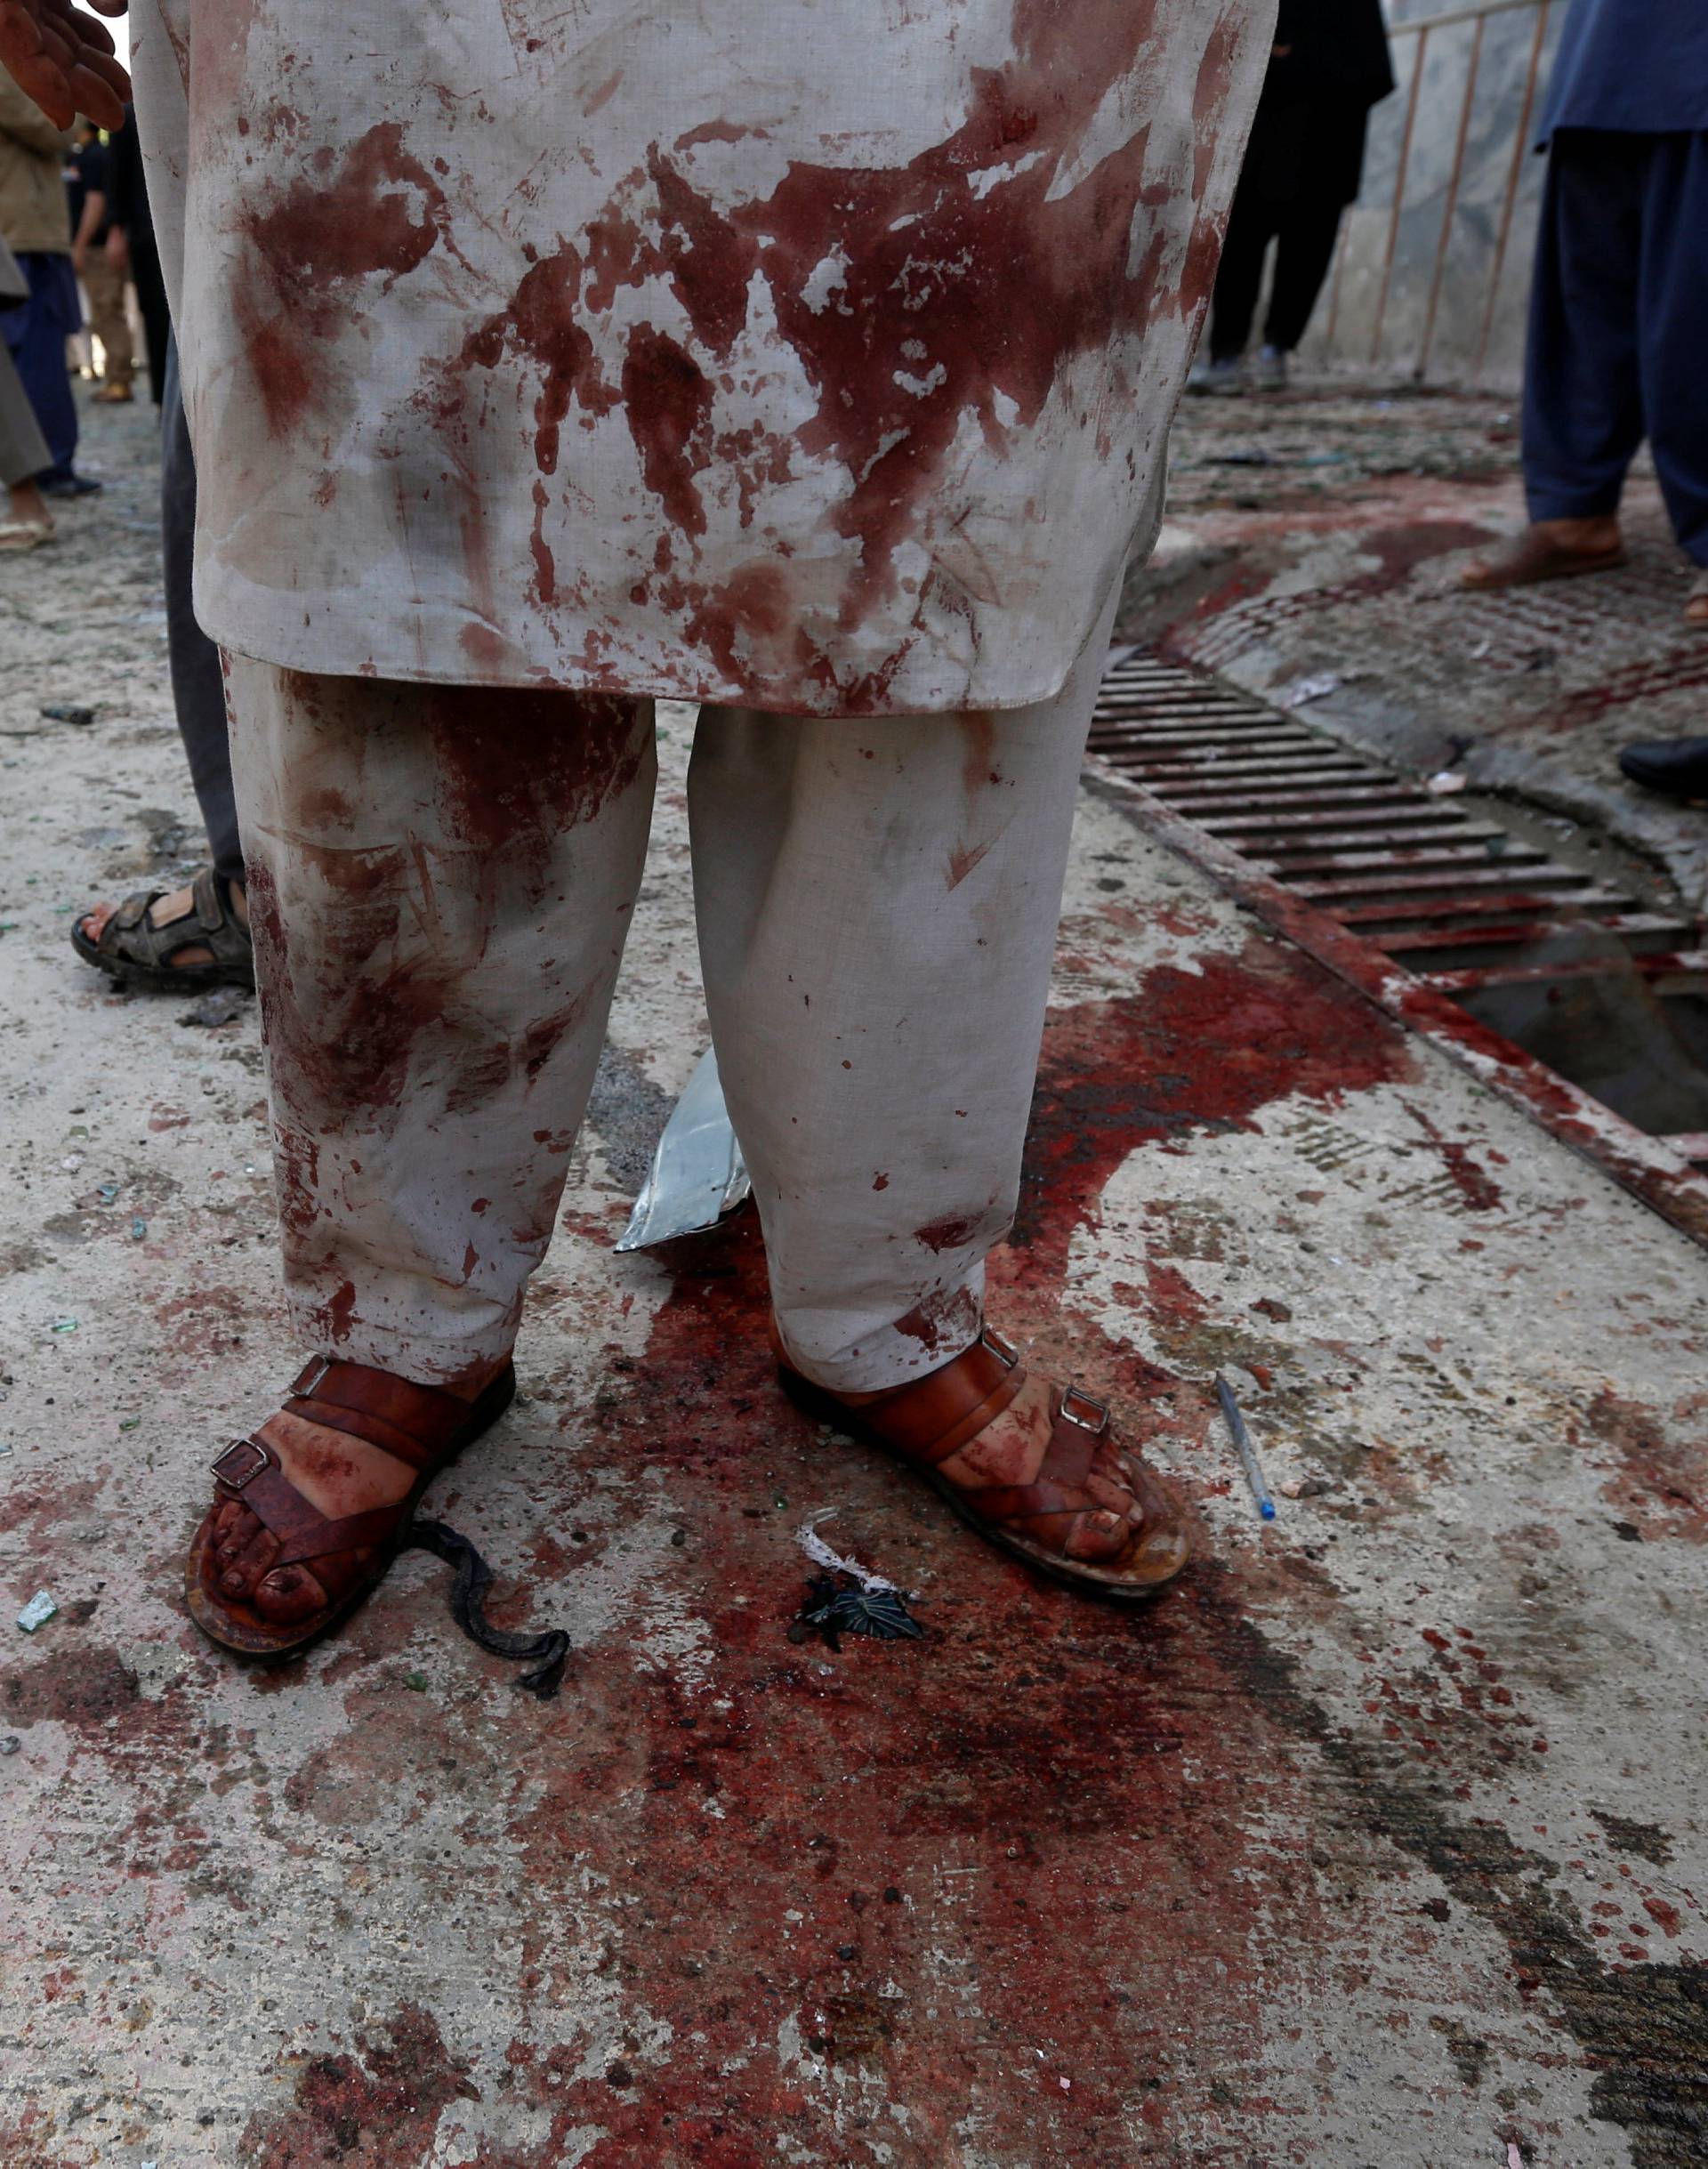 A man stained with blood inspects at the site of a suicide bomb attack in Kabul